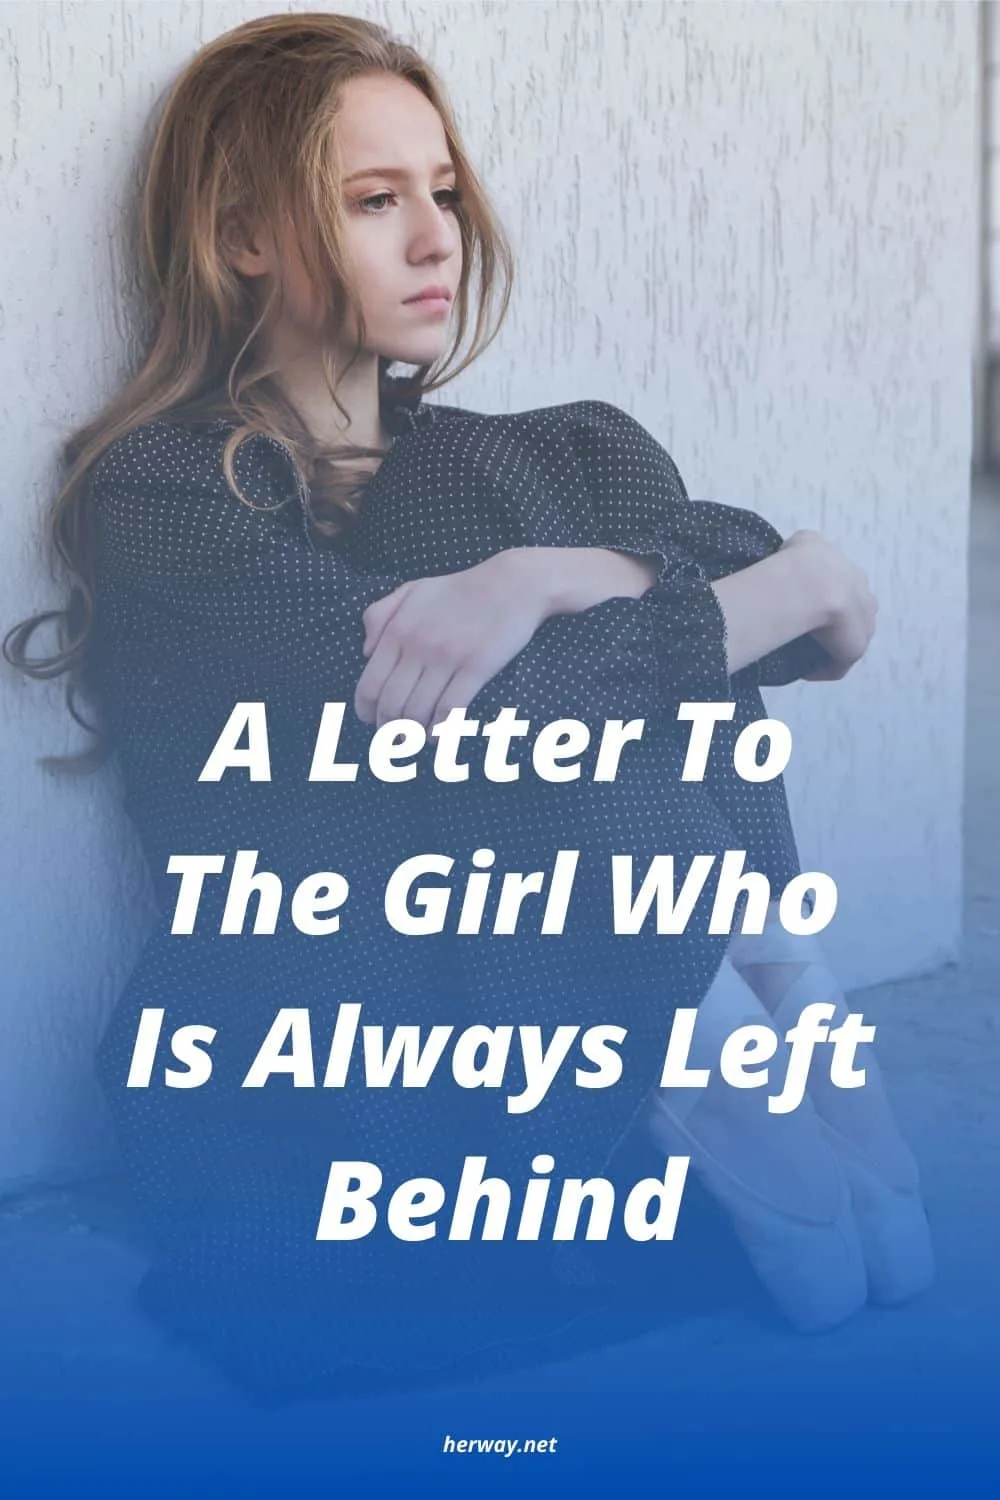 A Letter To The Girl Who Is Always Left Behind